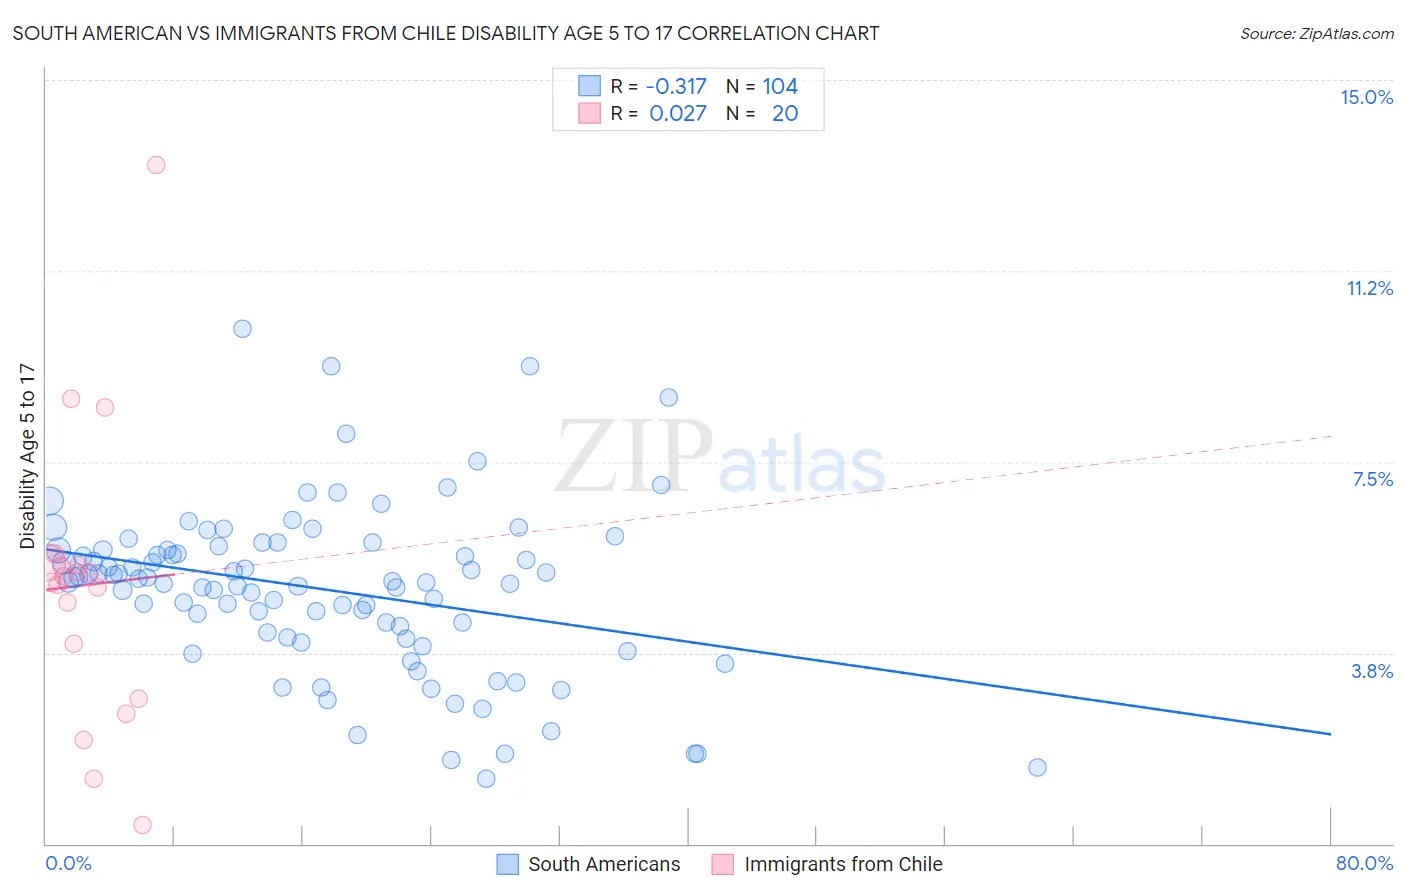 South American vs Immigrants from Chile Disability Age 5 to 17